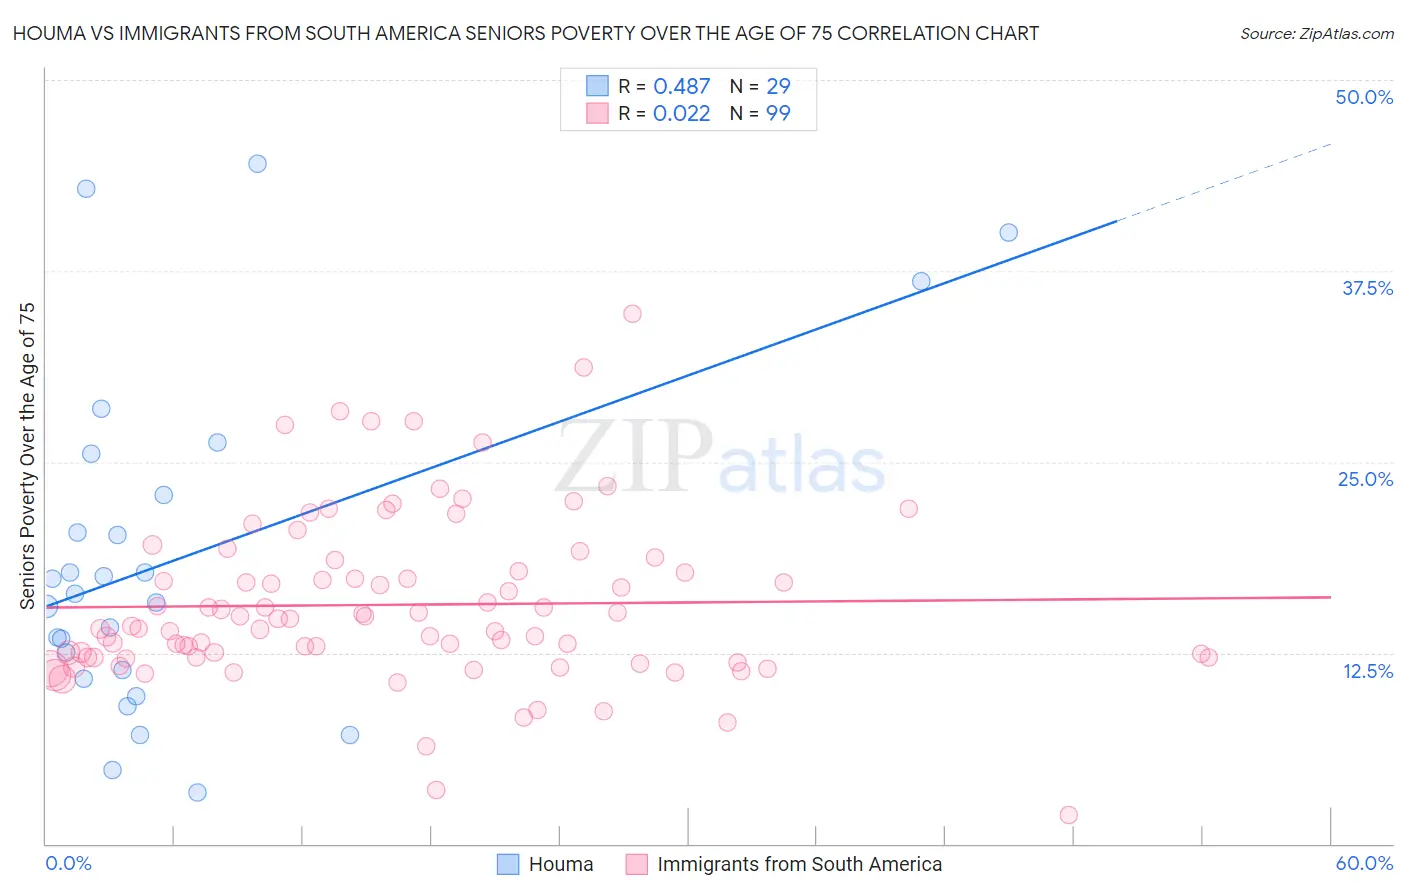 Houma vs Immigrants from South America Seniors Poverty Over the Age of 75